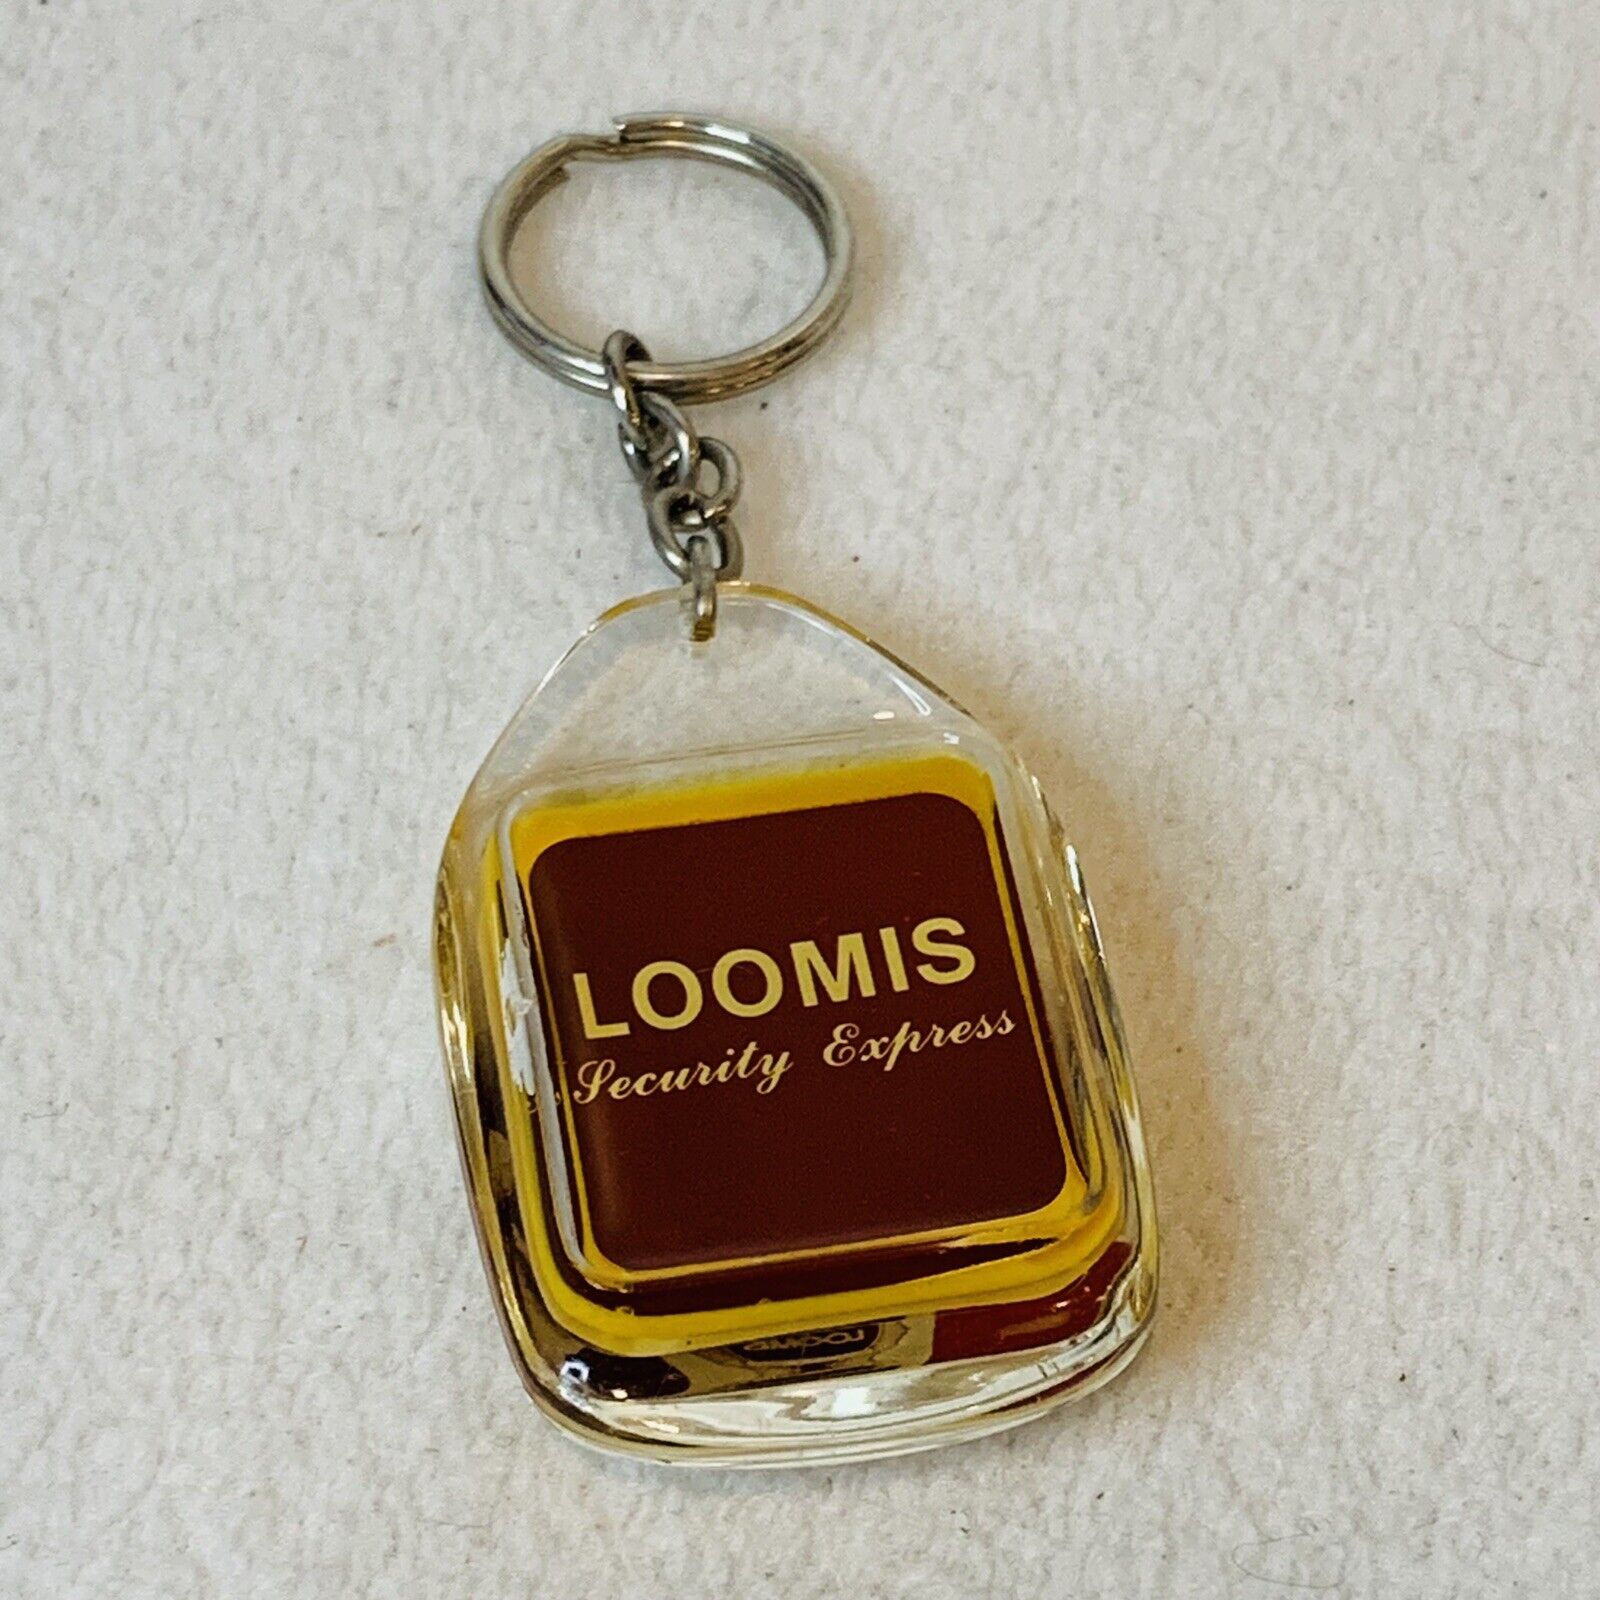 Vintage 80s Loomis Security Express Keychain Key Ring FOB Acrylic